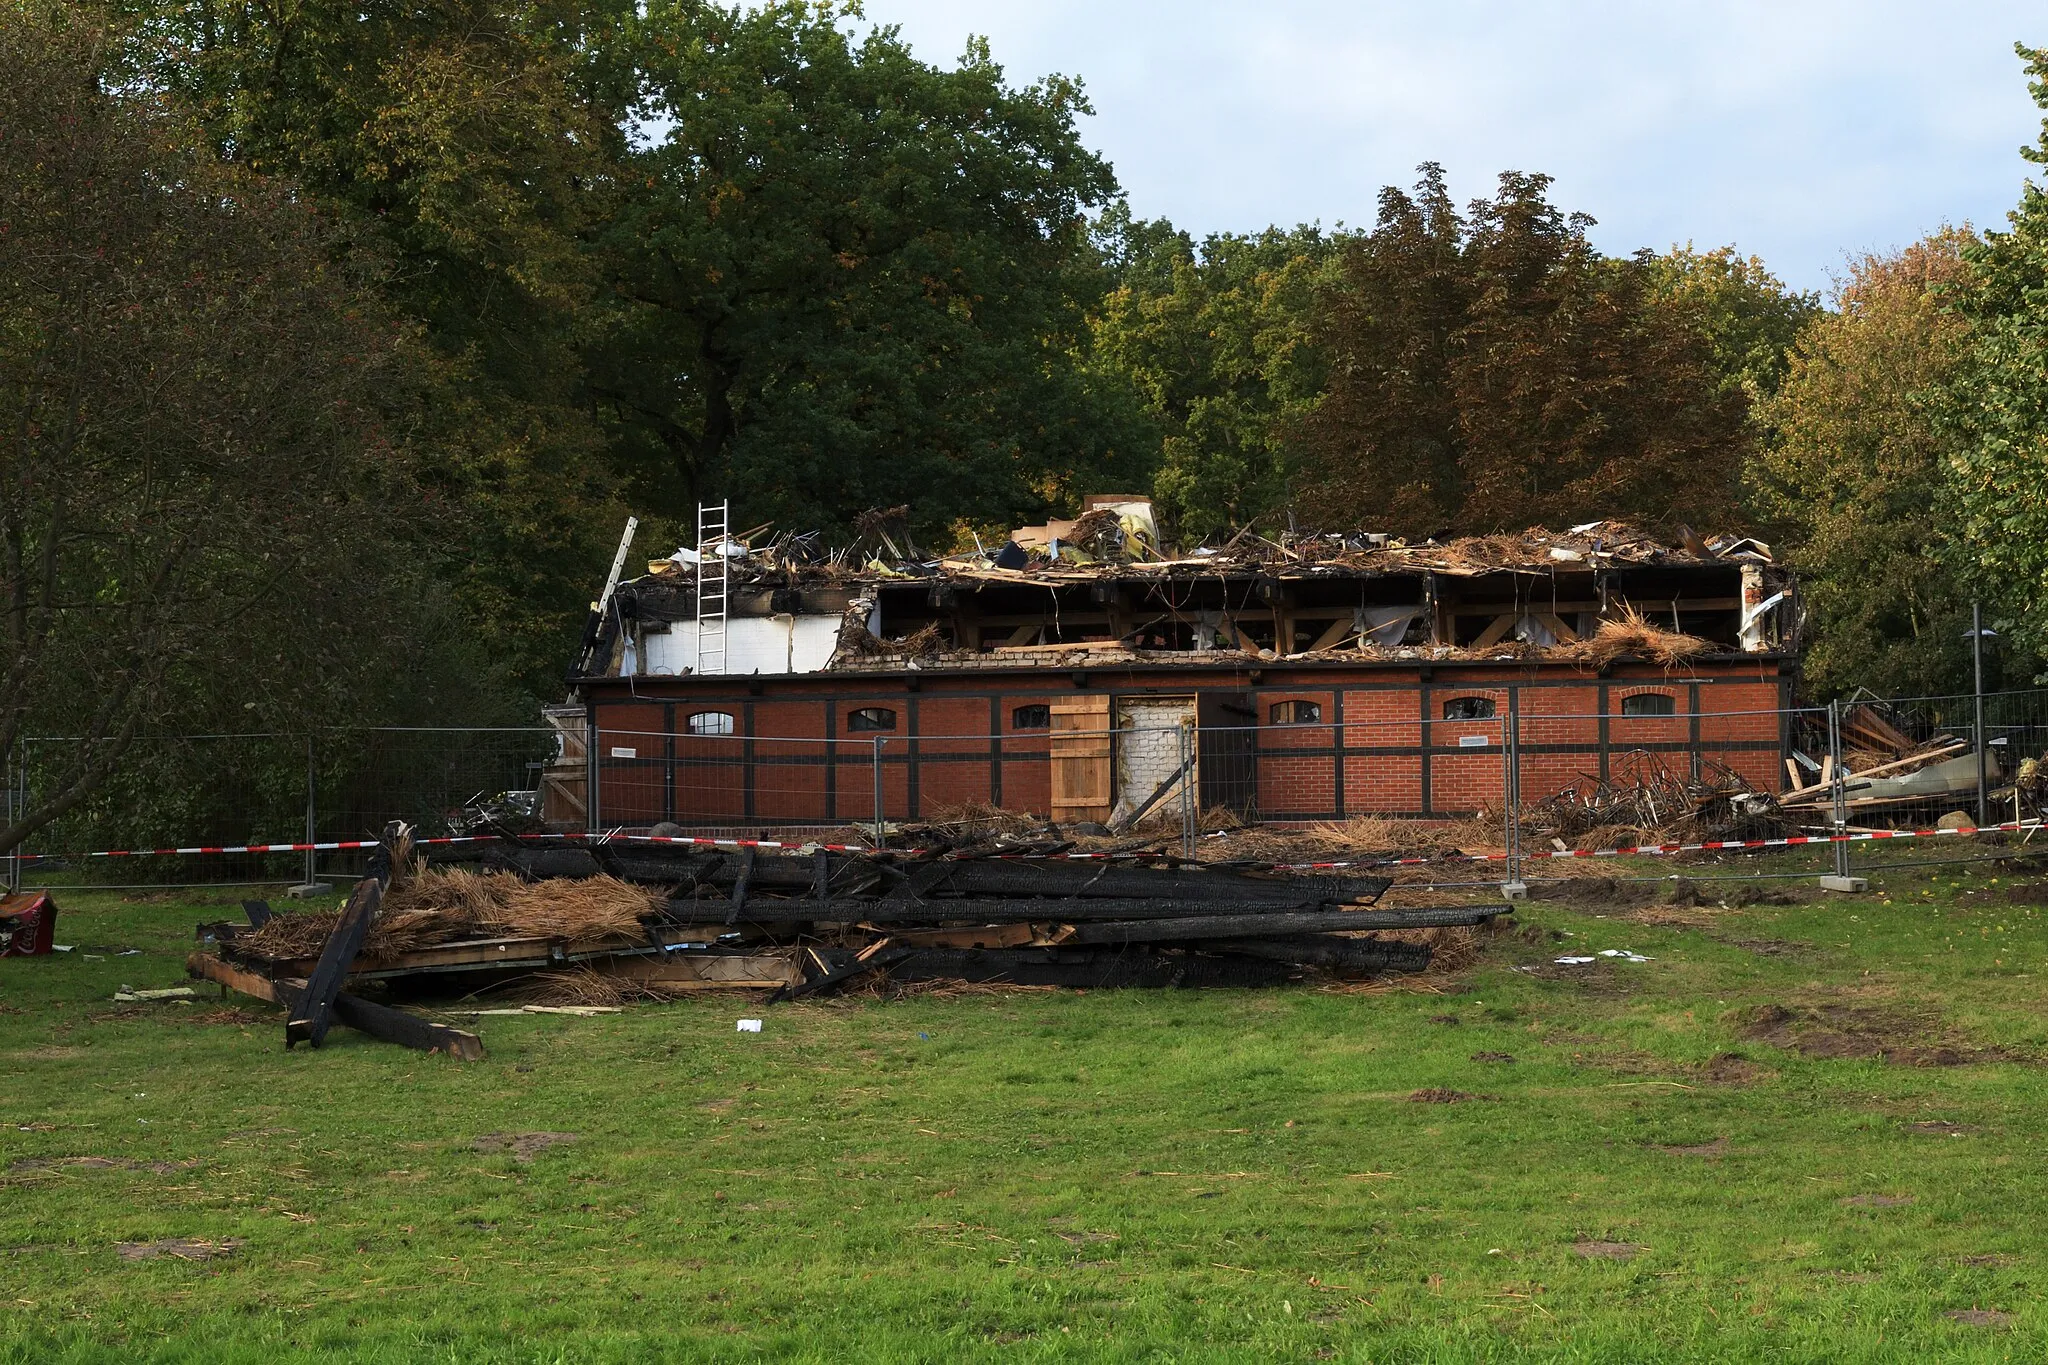 Photo showing: Remains of the museum barn from 1762 of the Museum Langes Tannen, Uetersen (Kreis Pinneberg), Germany, burnt down by arson on 10 October 2021. View from south. The fire site was seized and cordoned off by the police at the day the photo was taken, 16 October 2021.